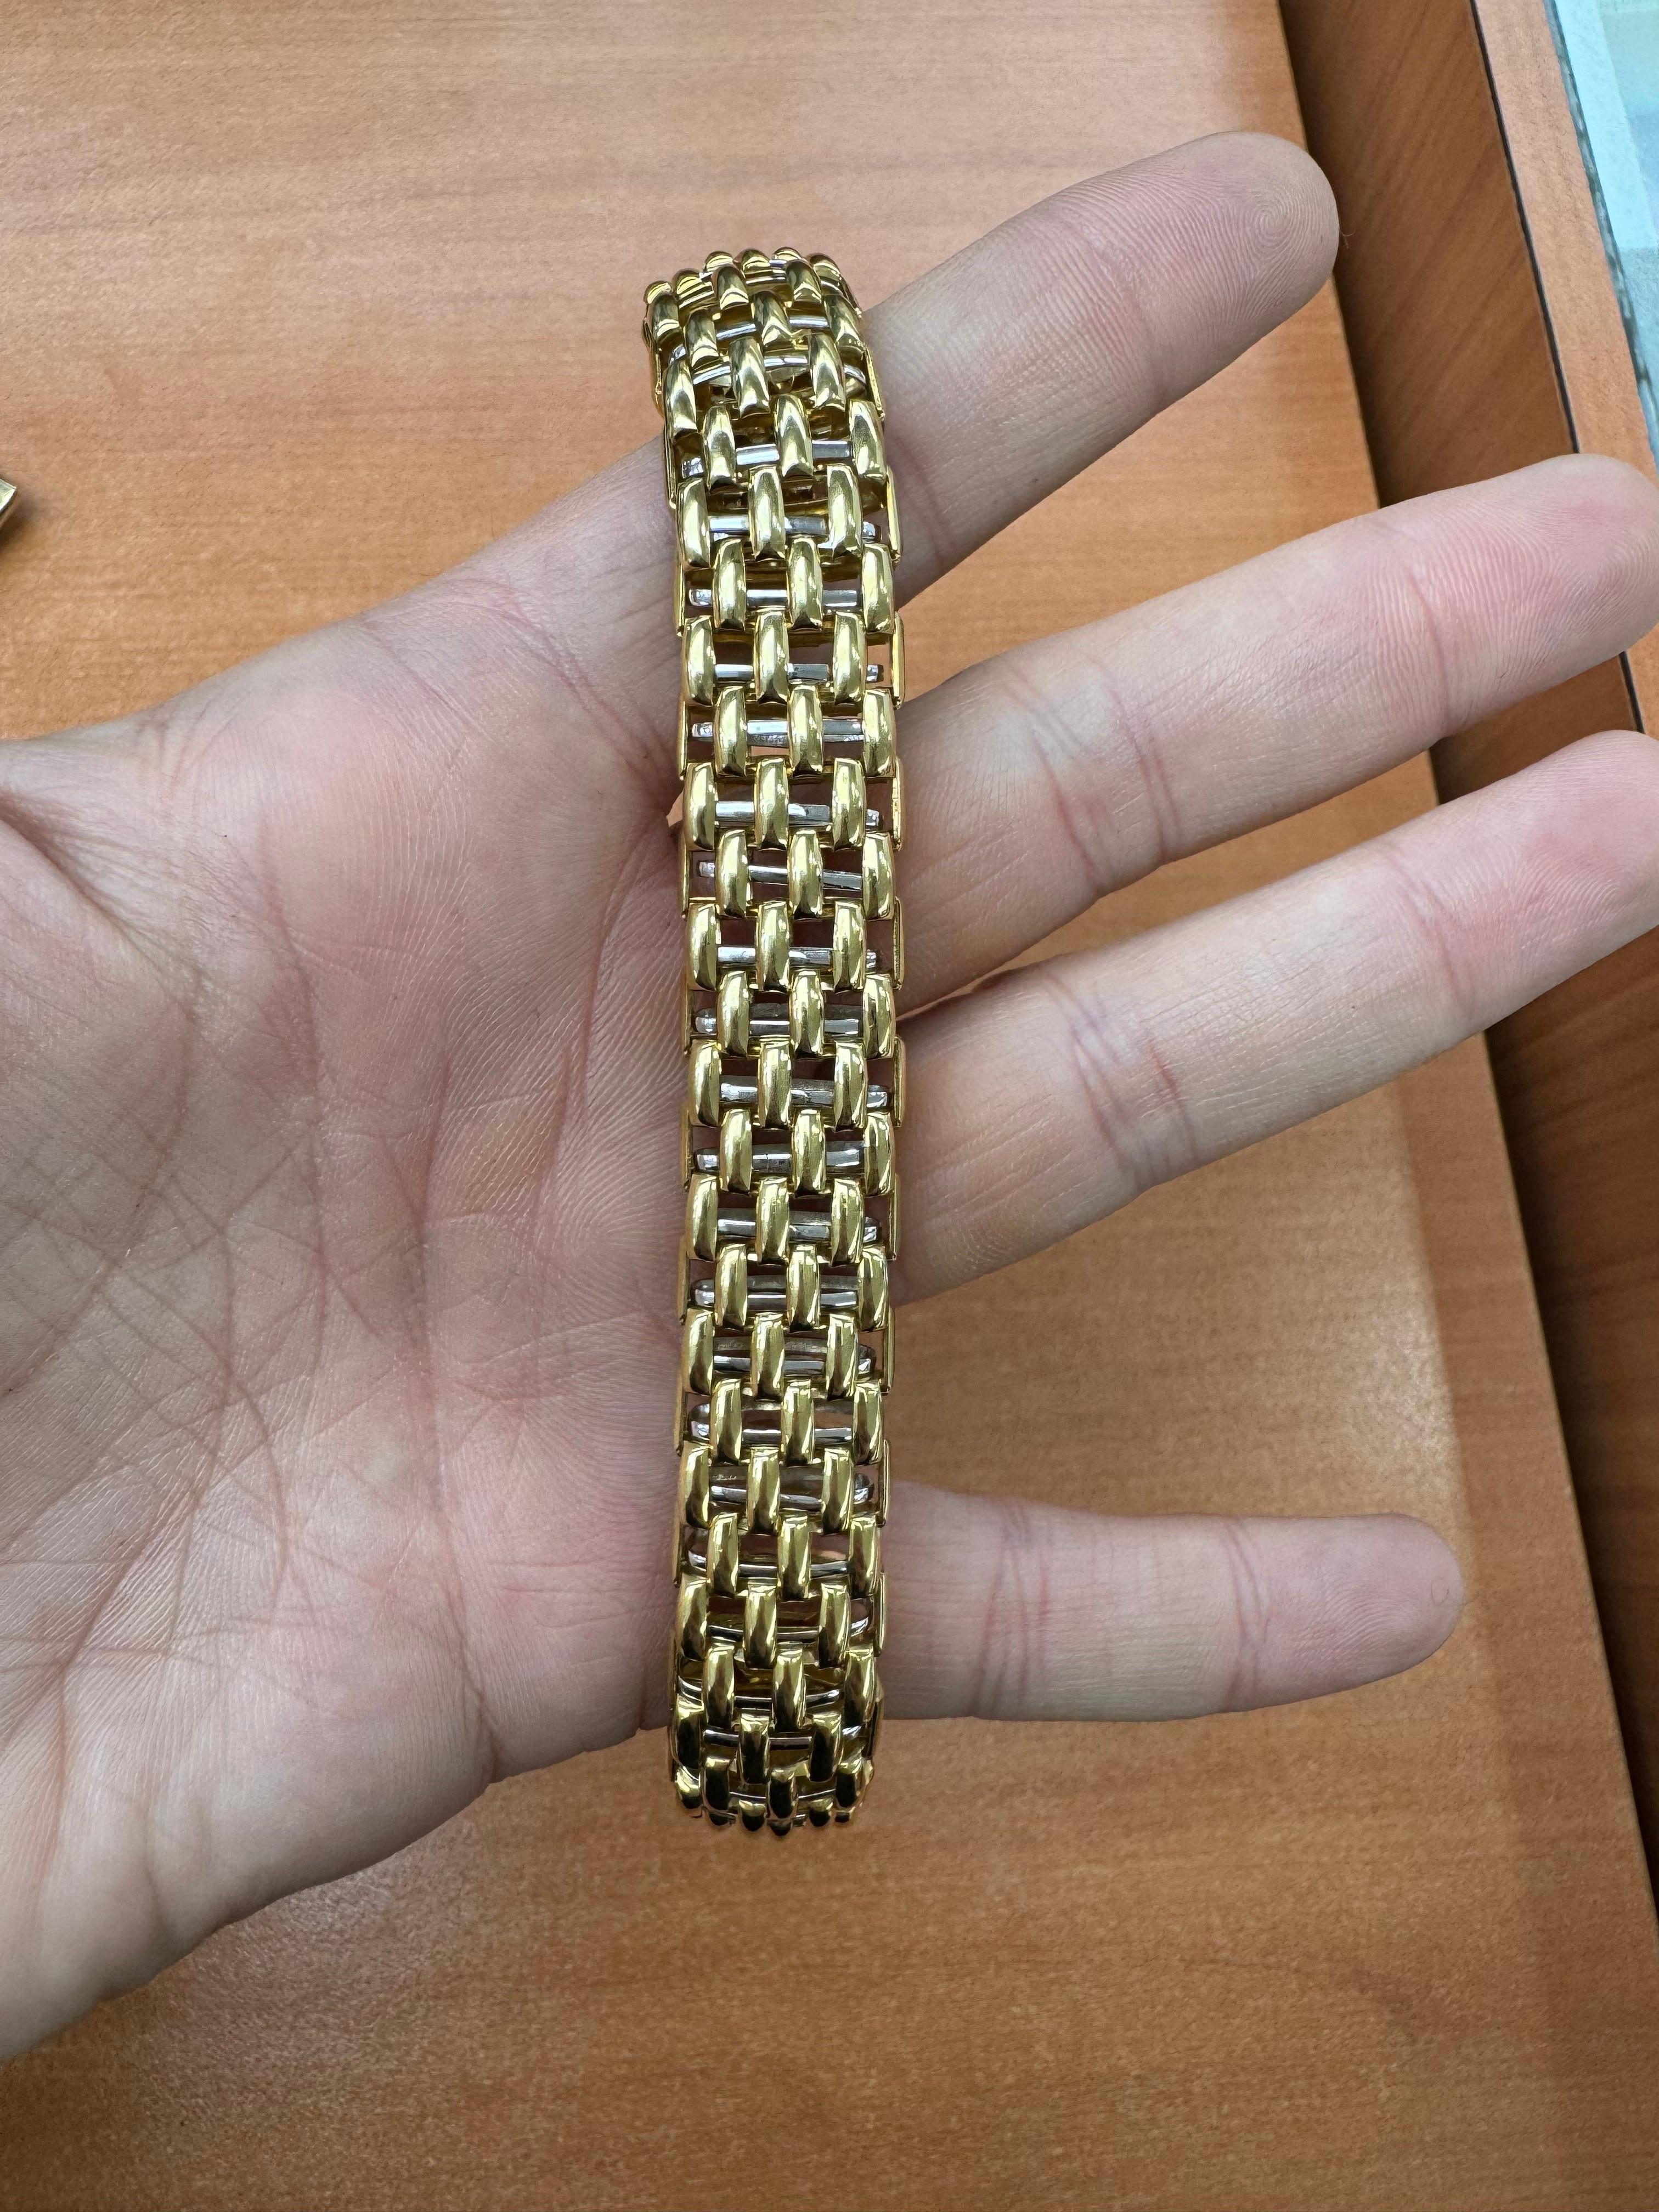 Fope Two-Tone Gold Basket Woven Motif Bracelet 49.2 Grams 18 Karat Yellow Gold In Excellent Condition For Sale In New York, NY